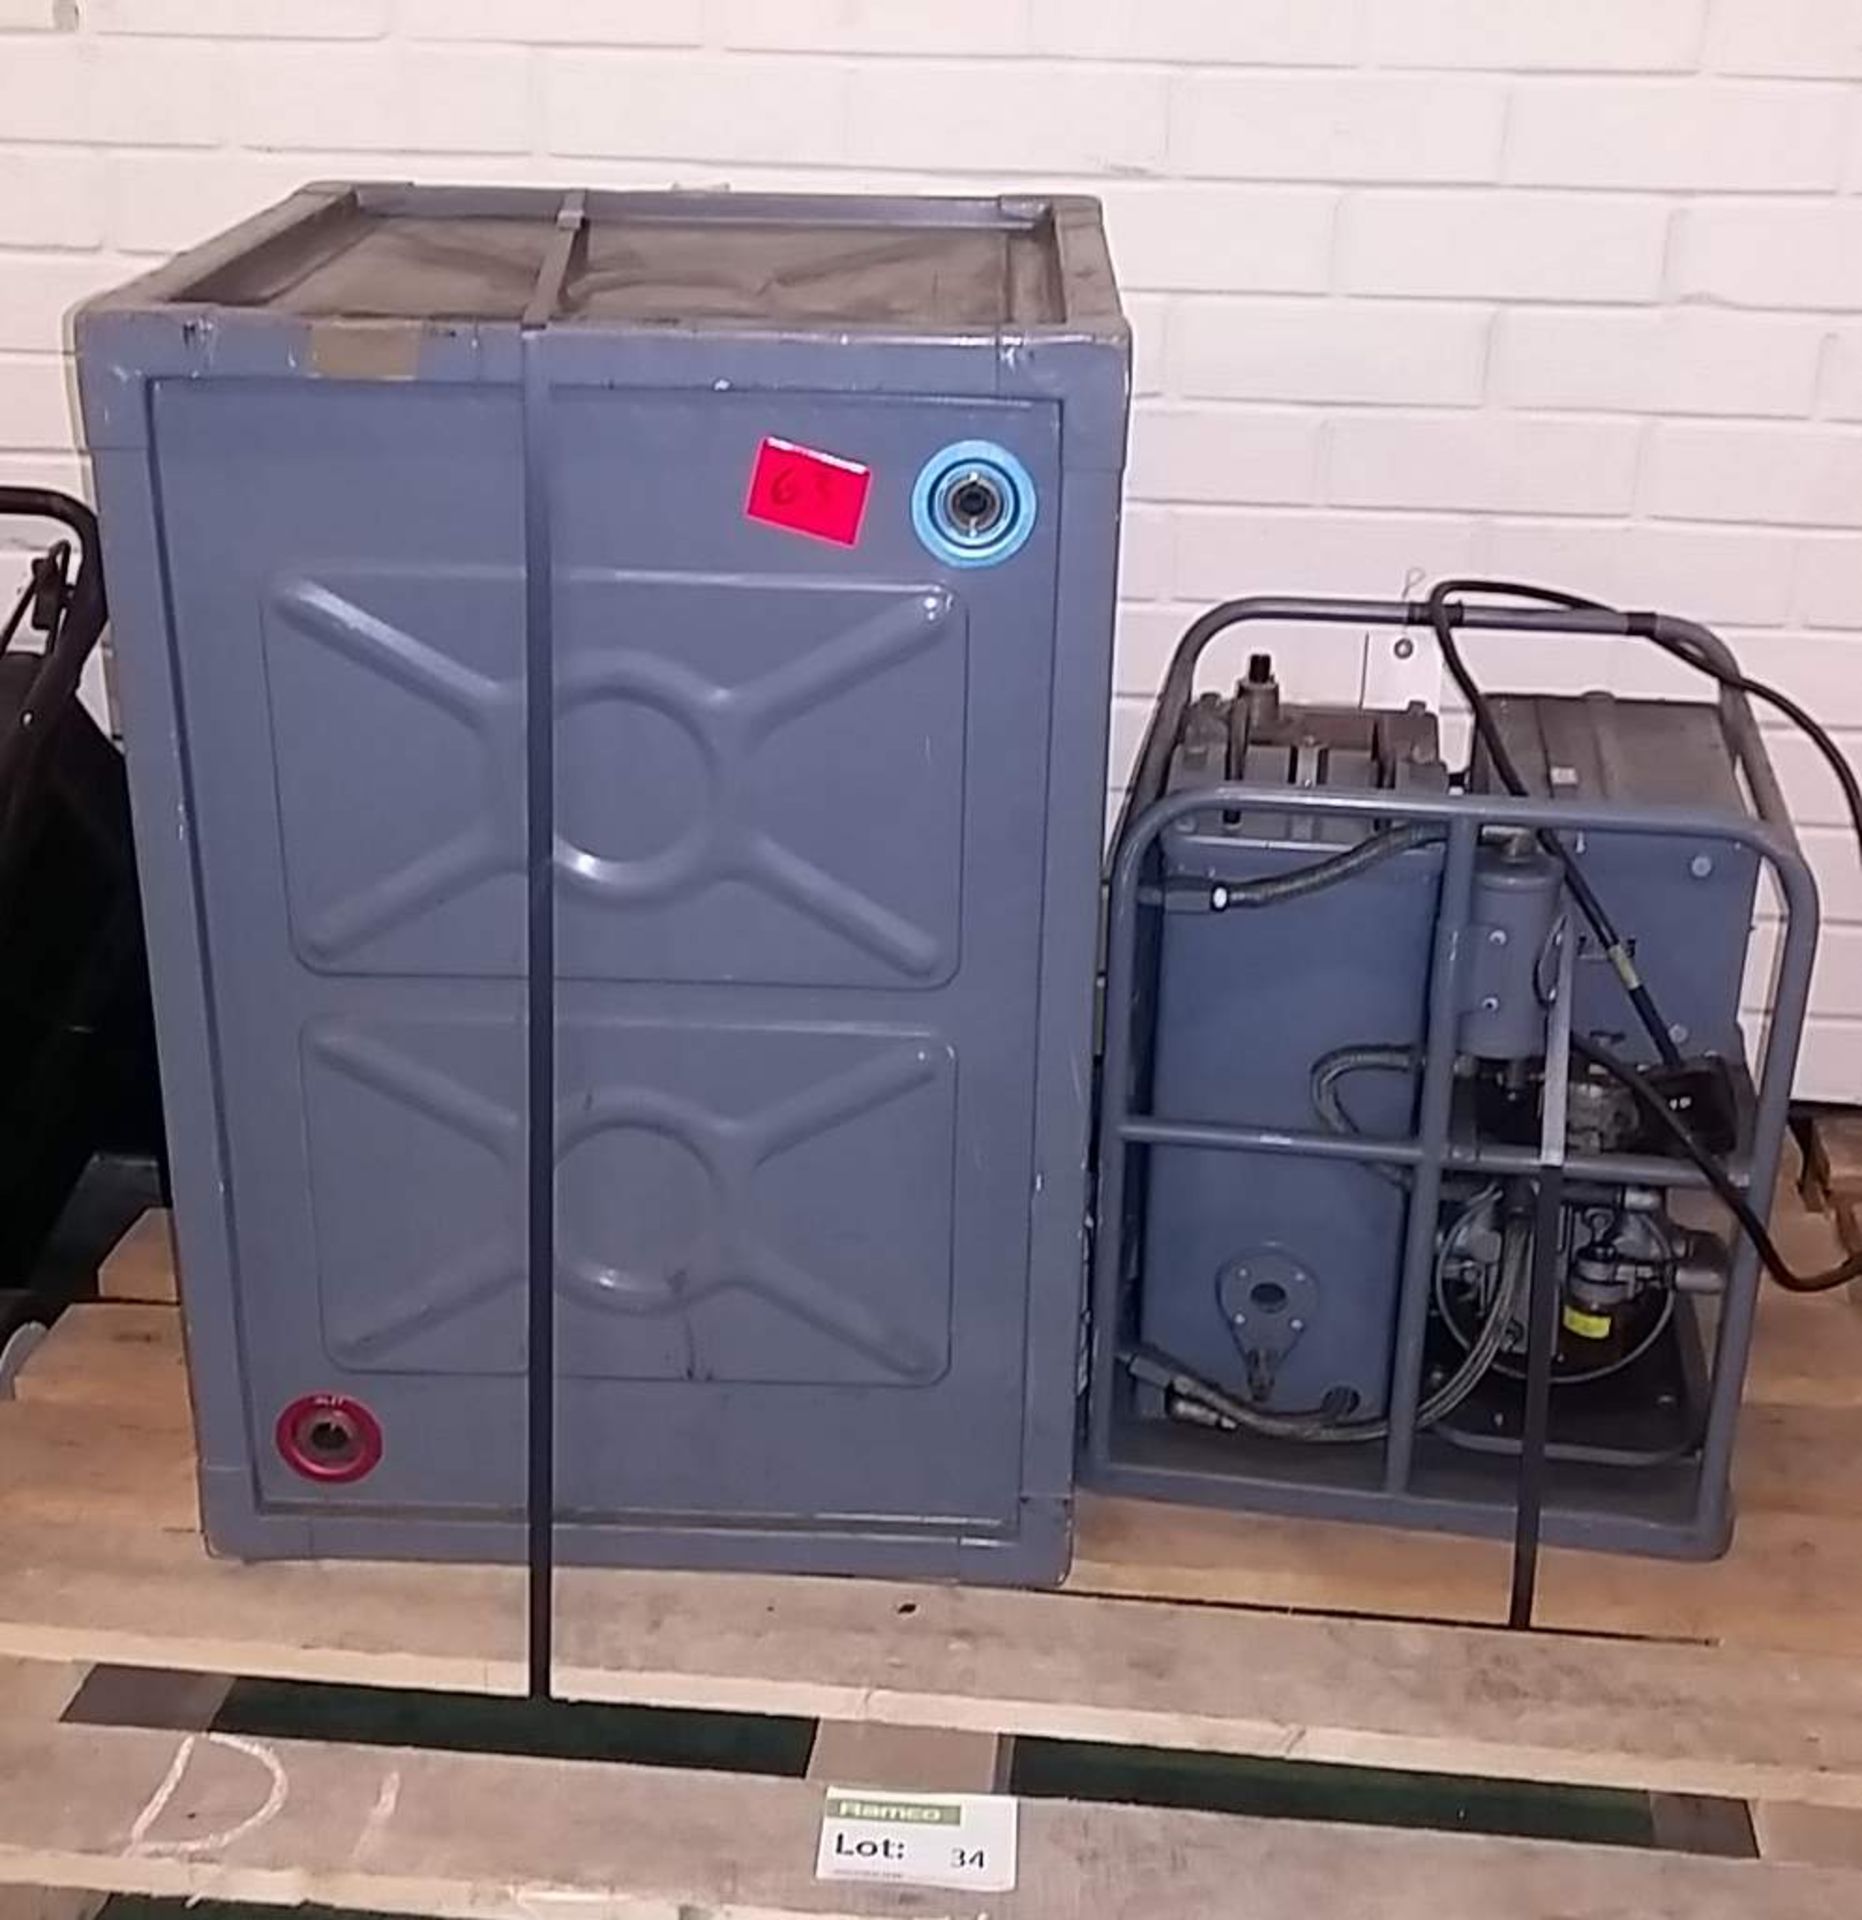 Heating and drying compressor units